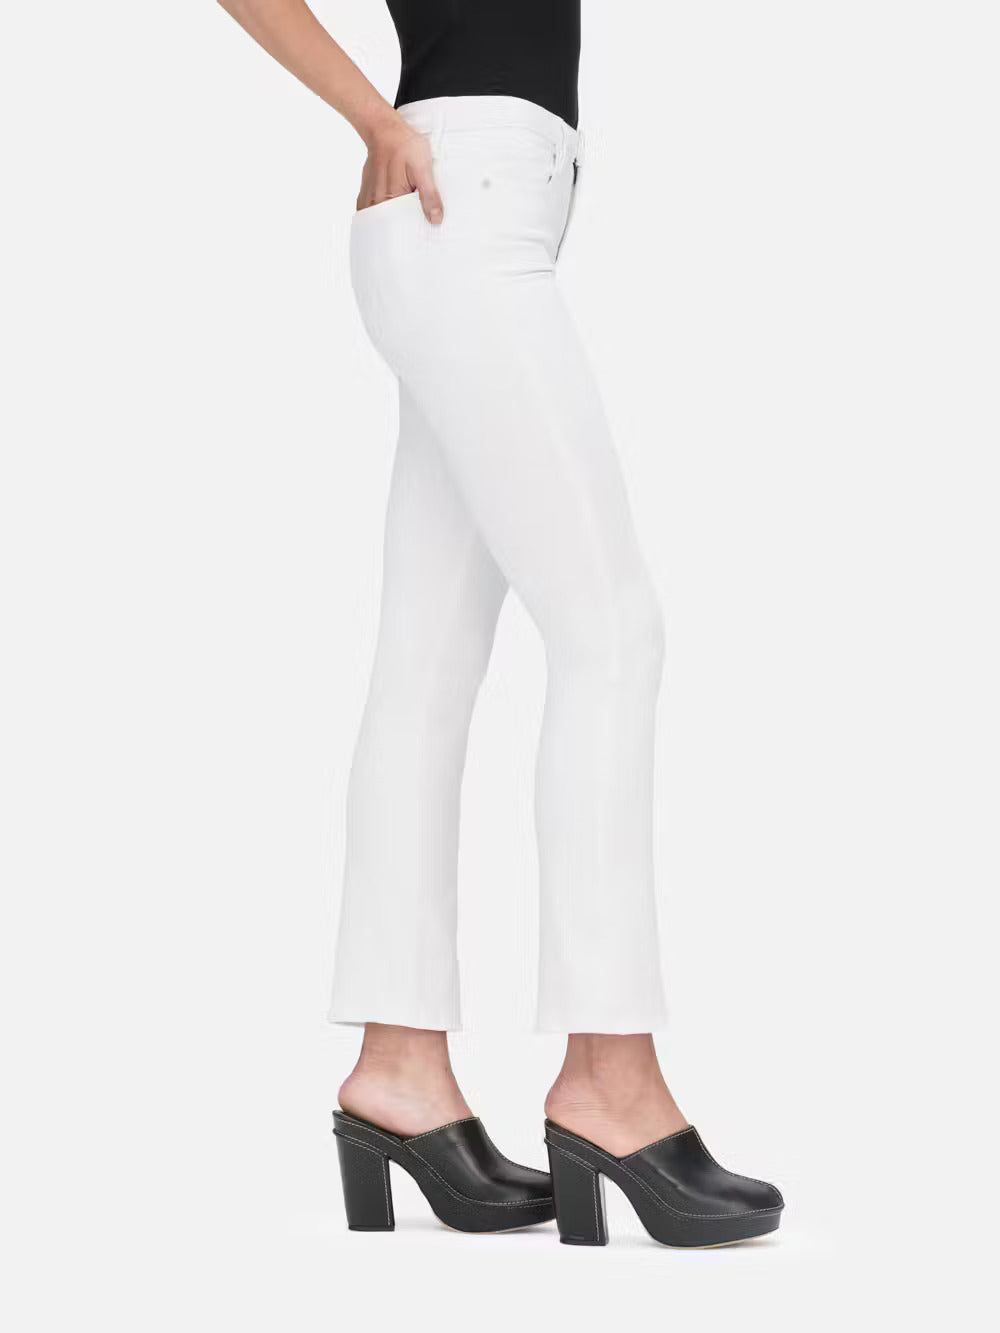 A woman wearing Le High Straight - Blanc jeans by Frame and black heels.